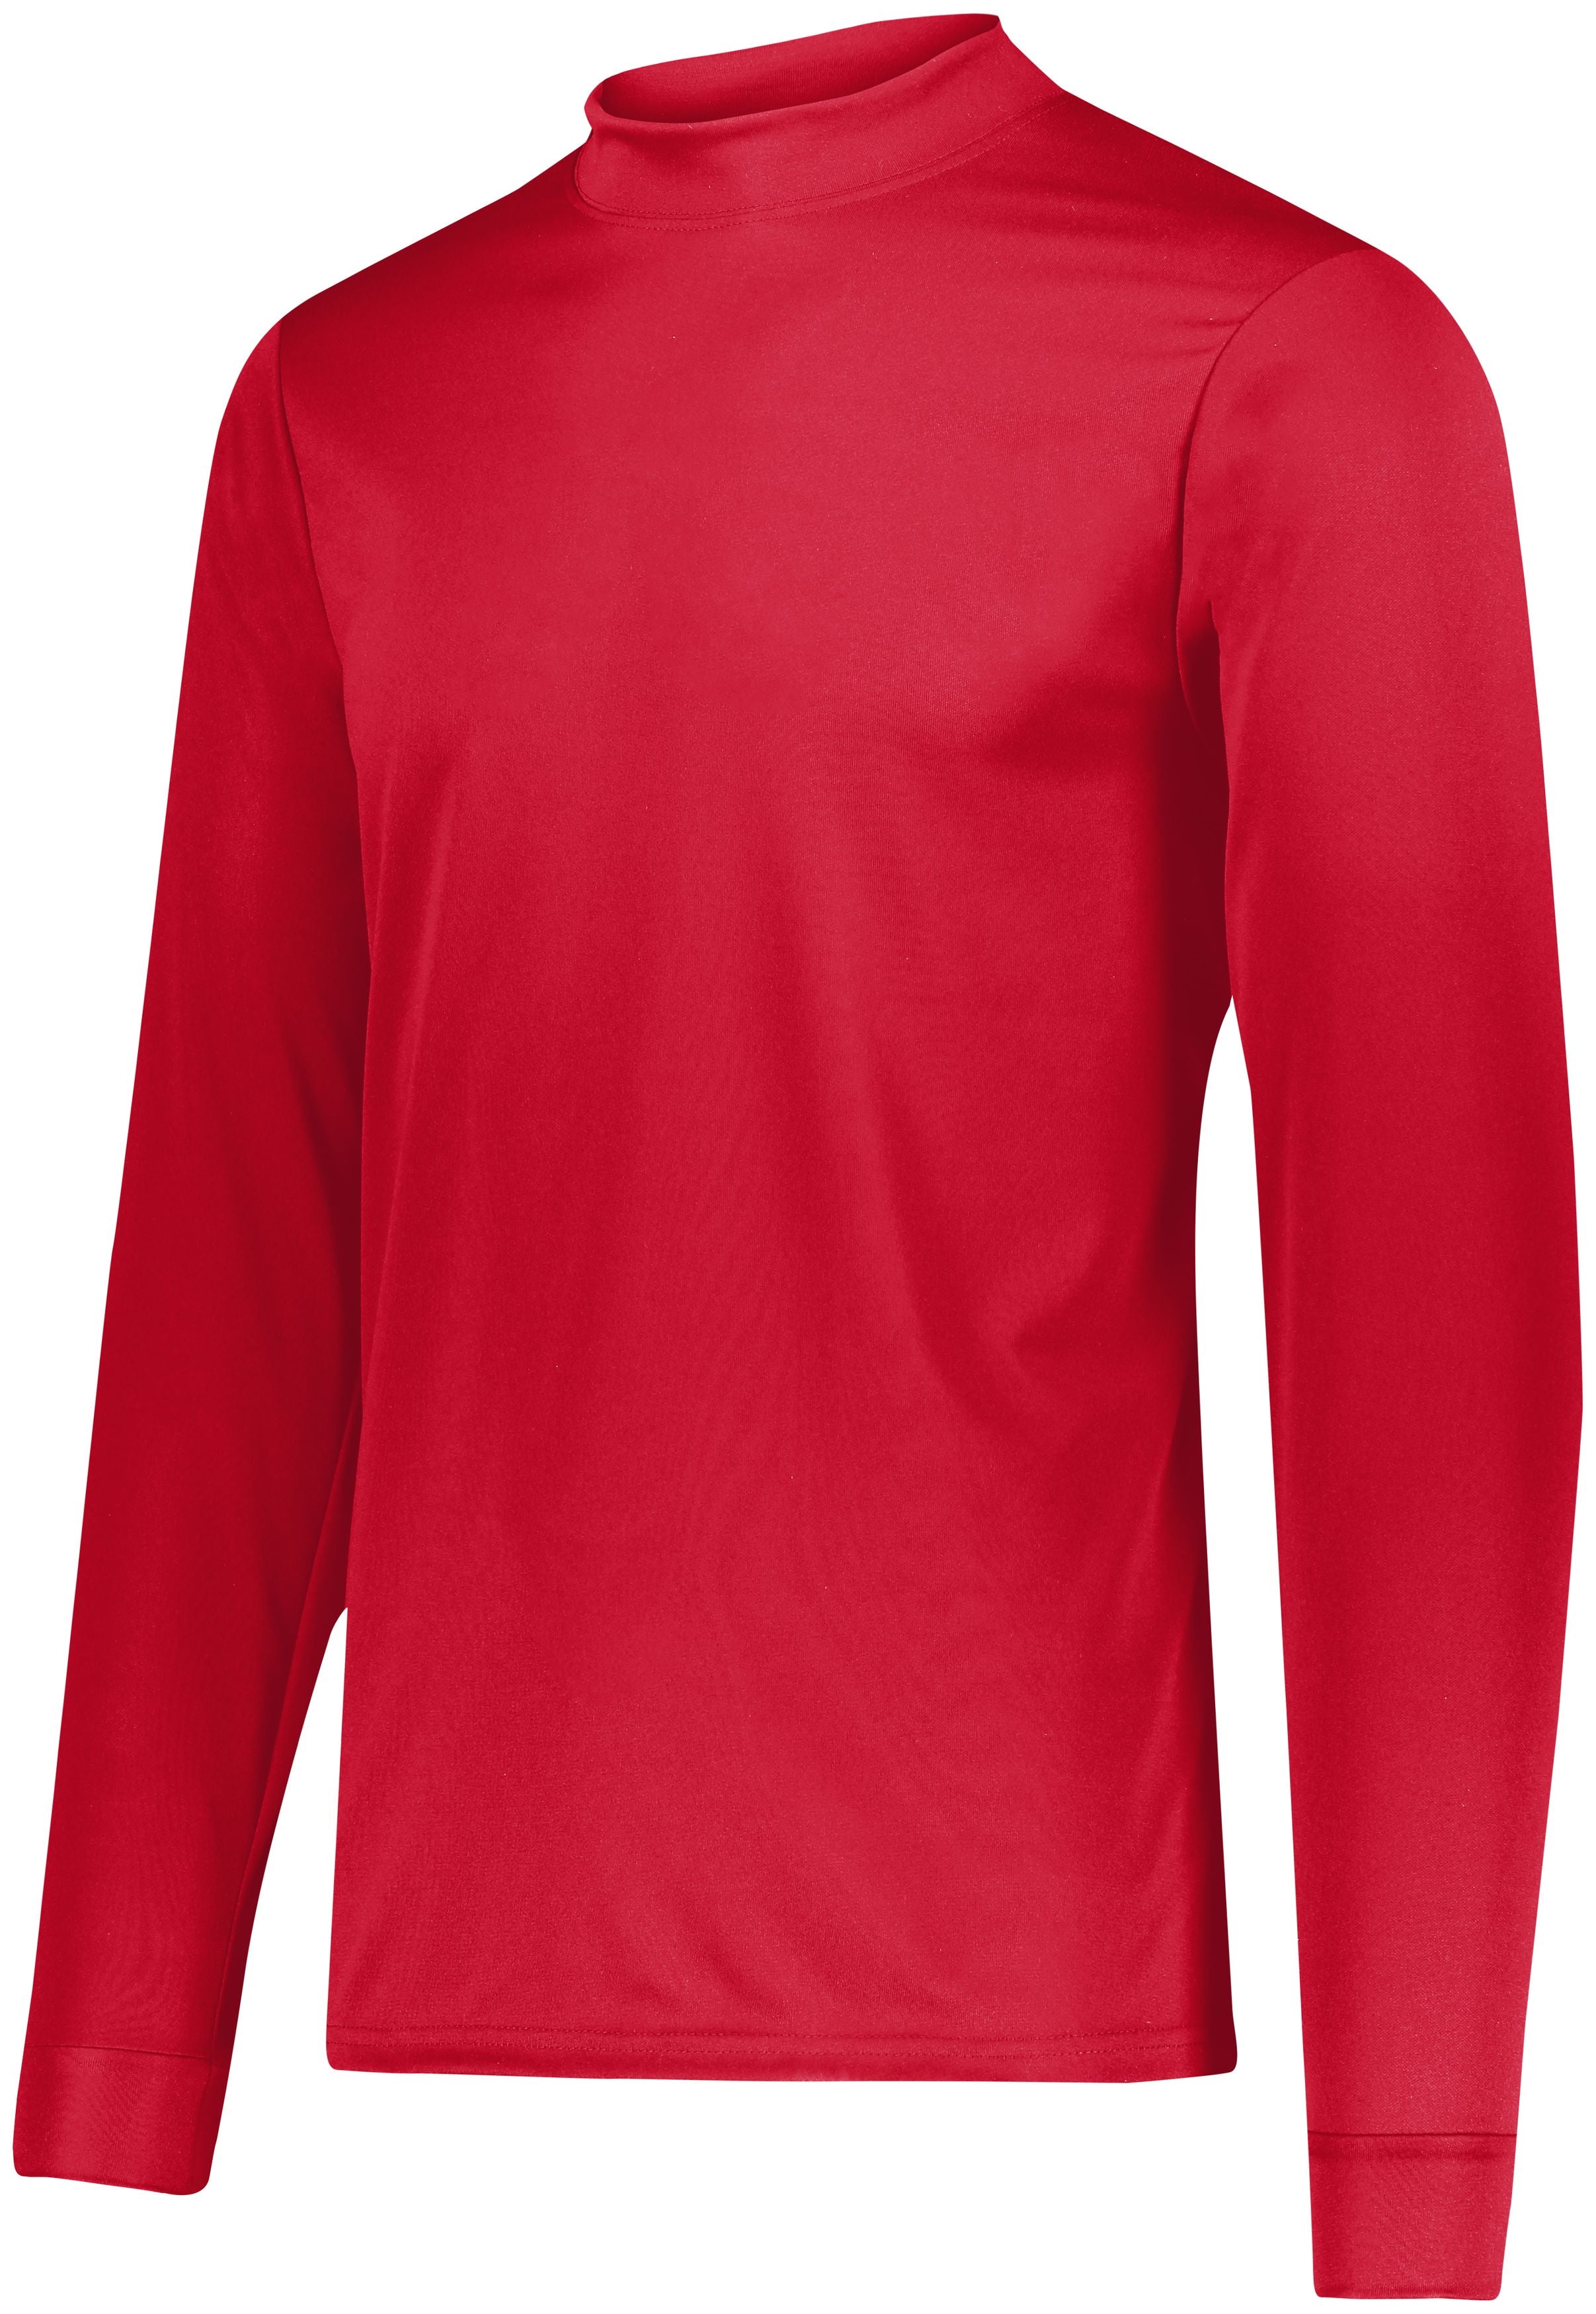 Augusta Sportswear Youth Wicking Mock Turtleneck in Red  -Part of the Youth, Augusta-Products, Tennis, Shirts product lines at KanaleyCreations.com